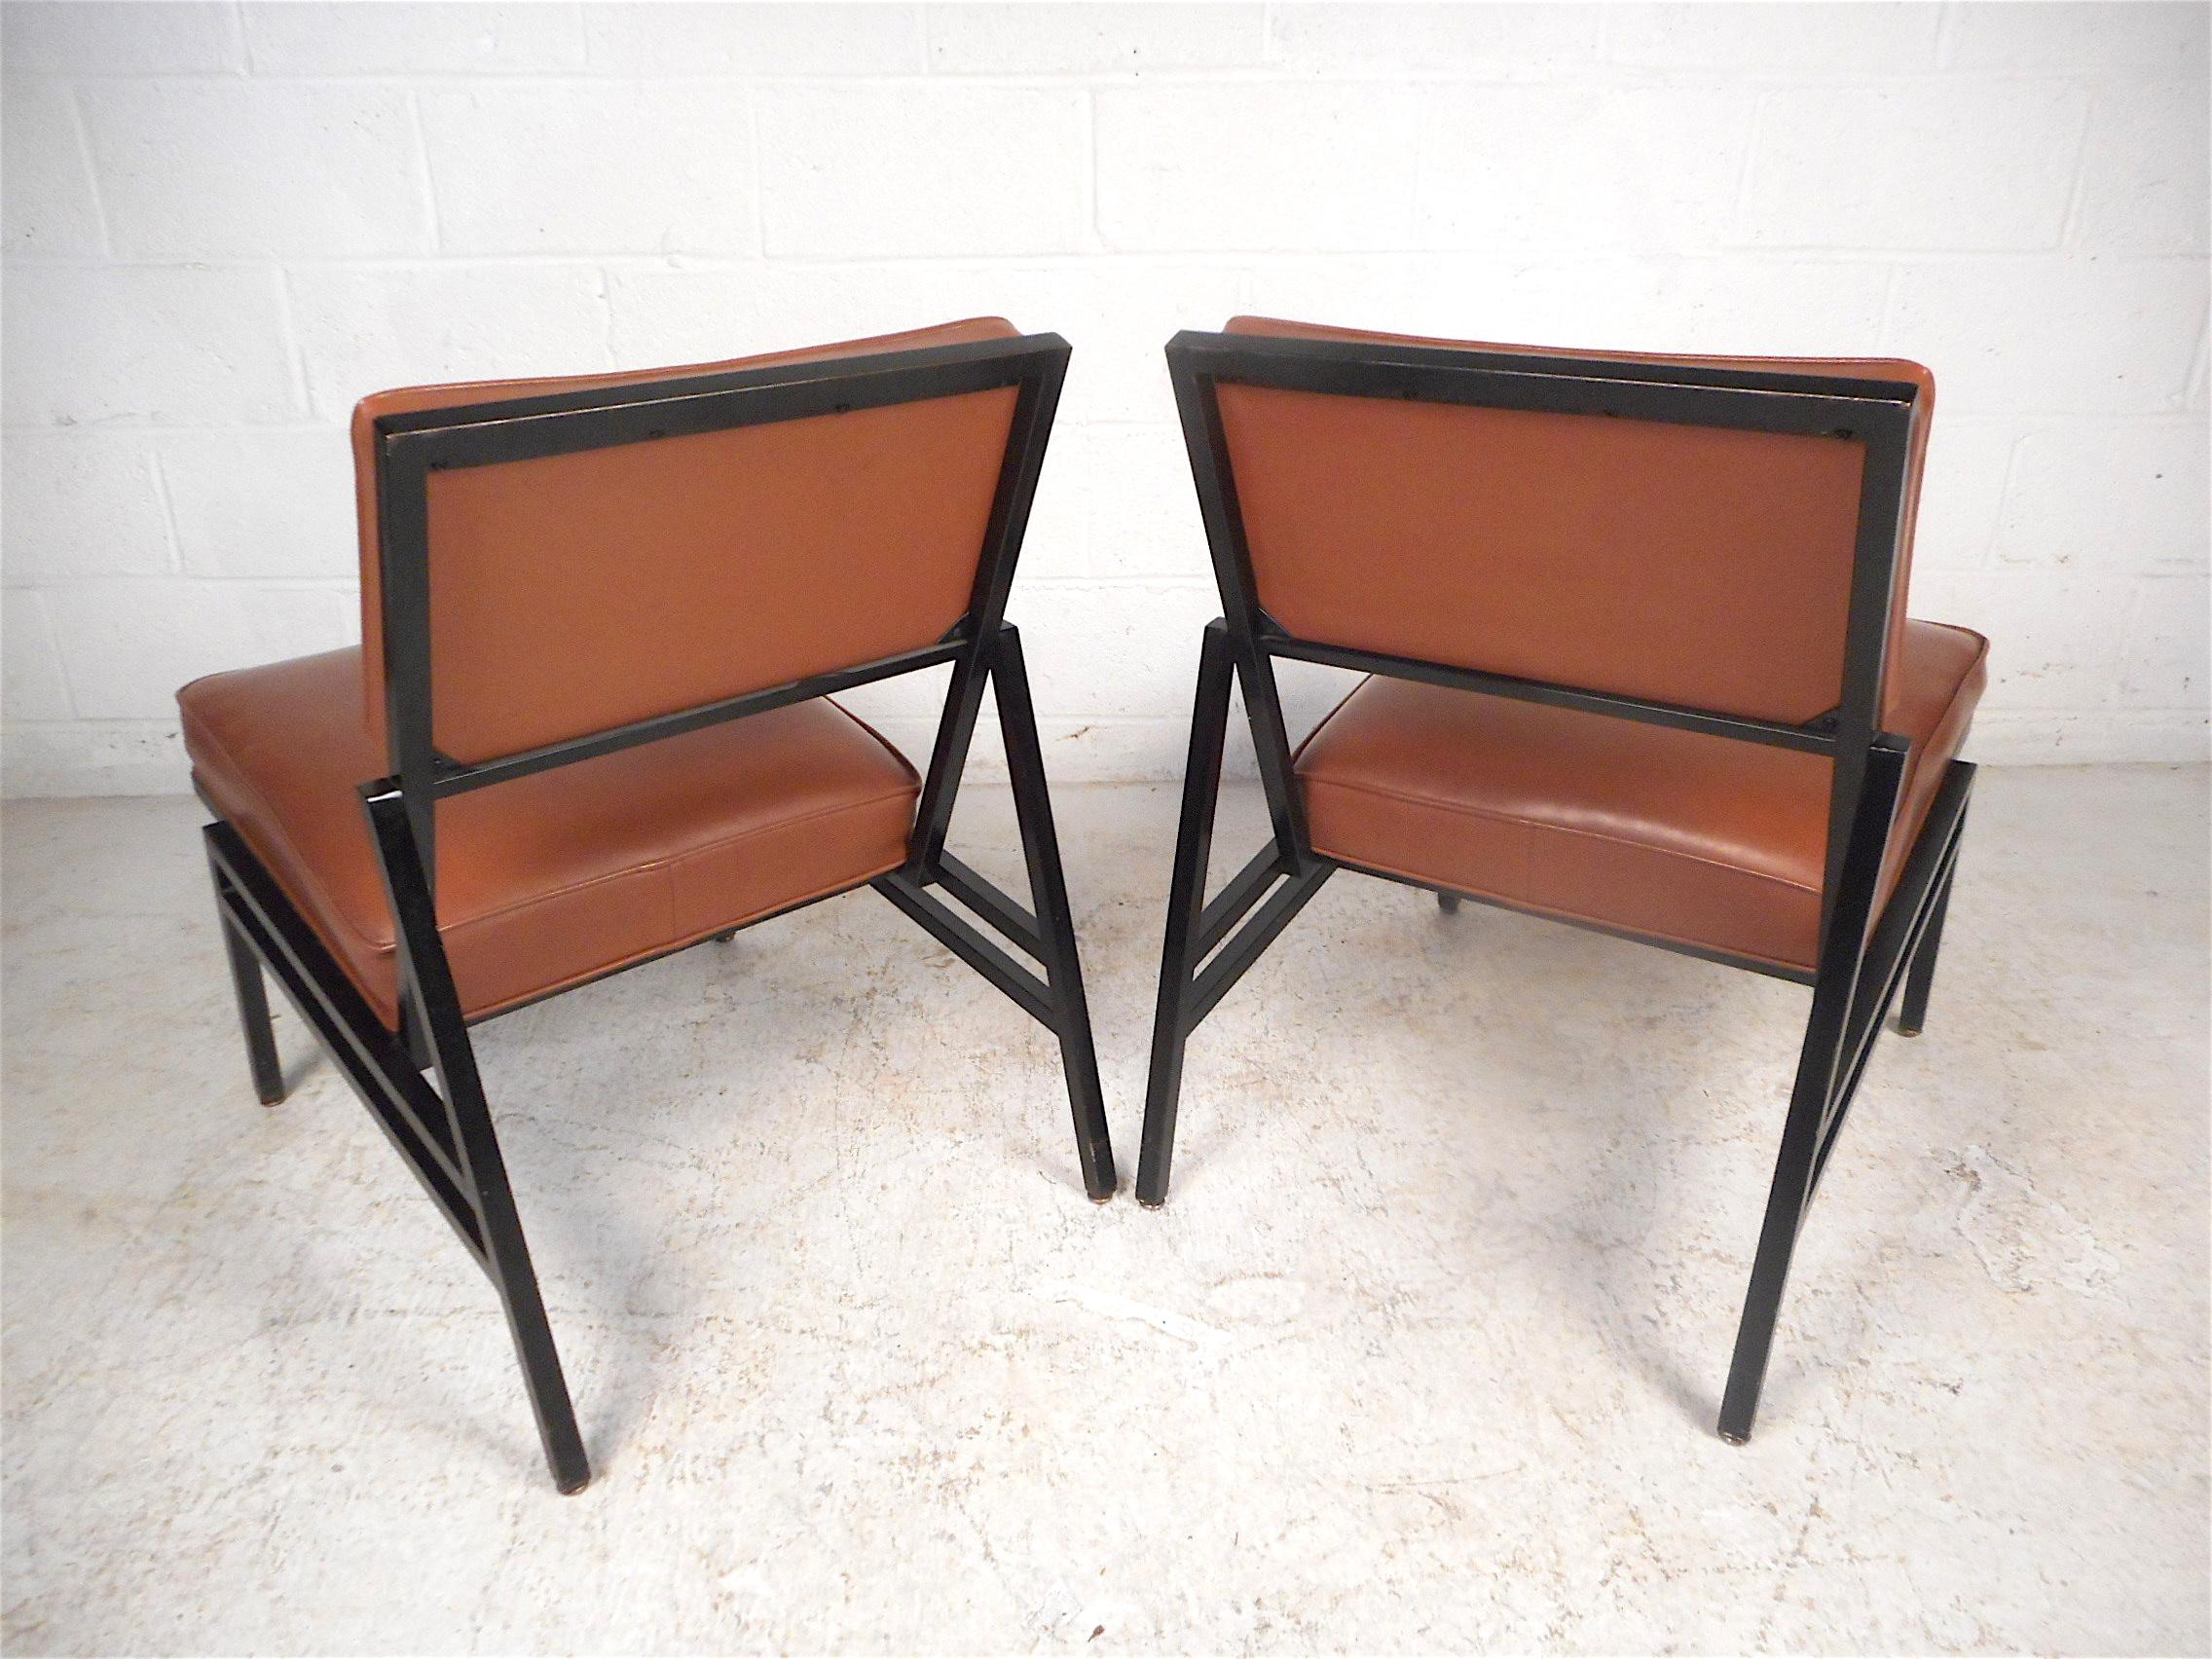 American Midcentury Lounge Chairs by Steelcase, a Pair For Sale